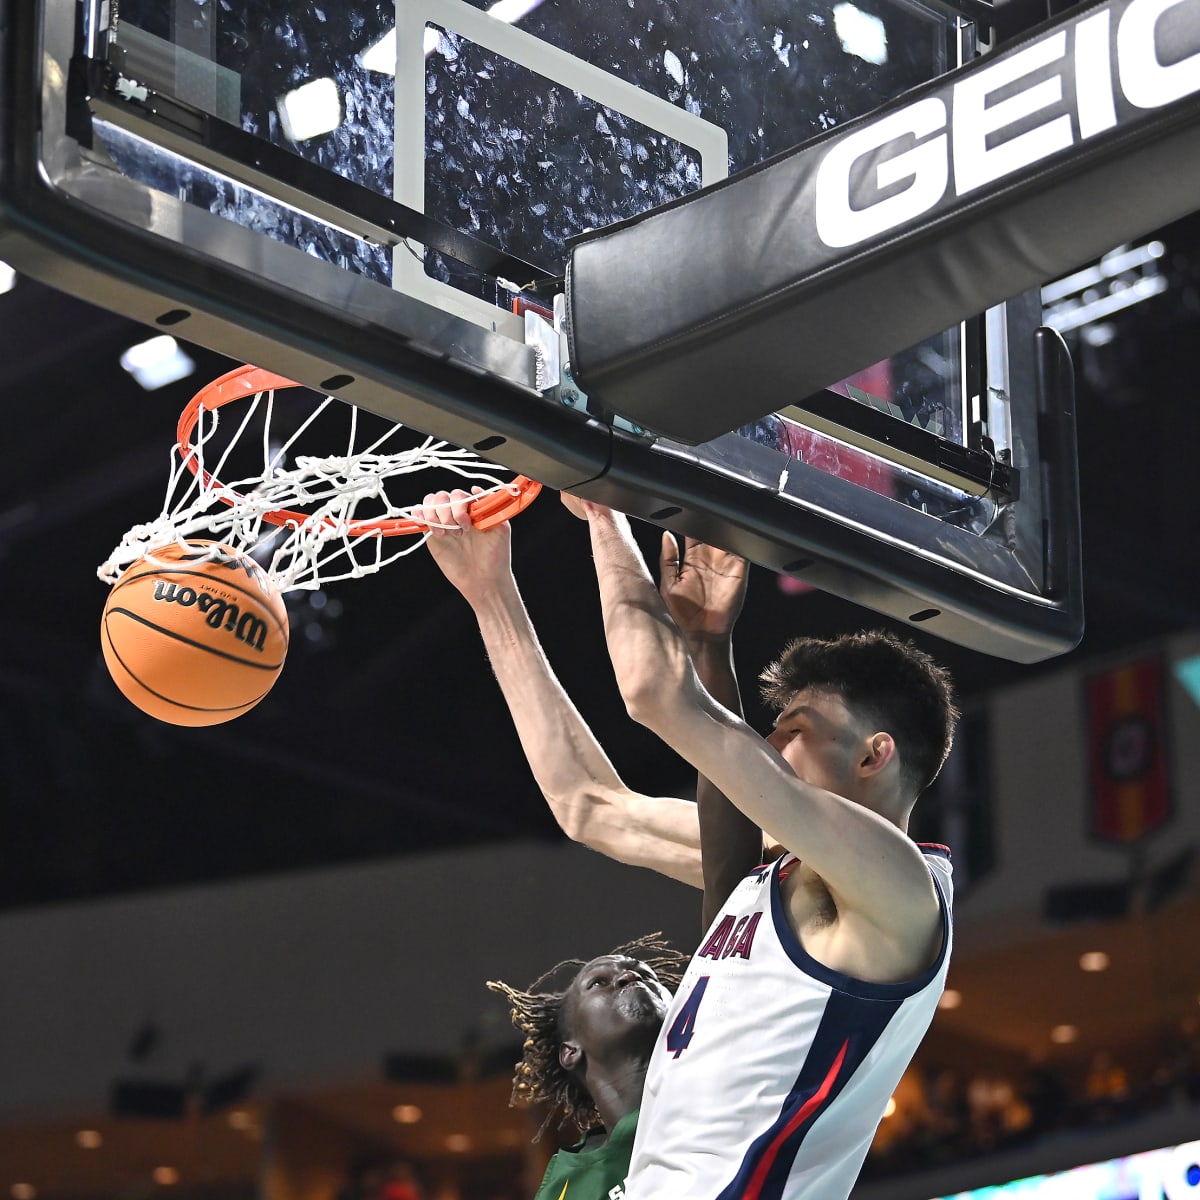 No. 9 Gonzaga men pull away late to beat USF in WCC semifinals